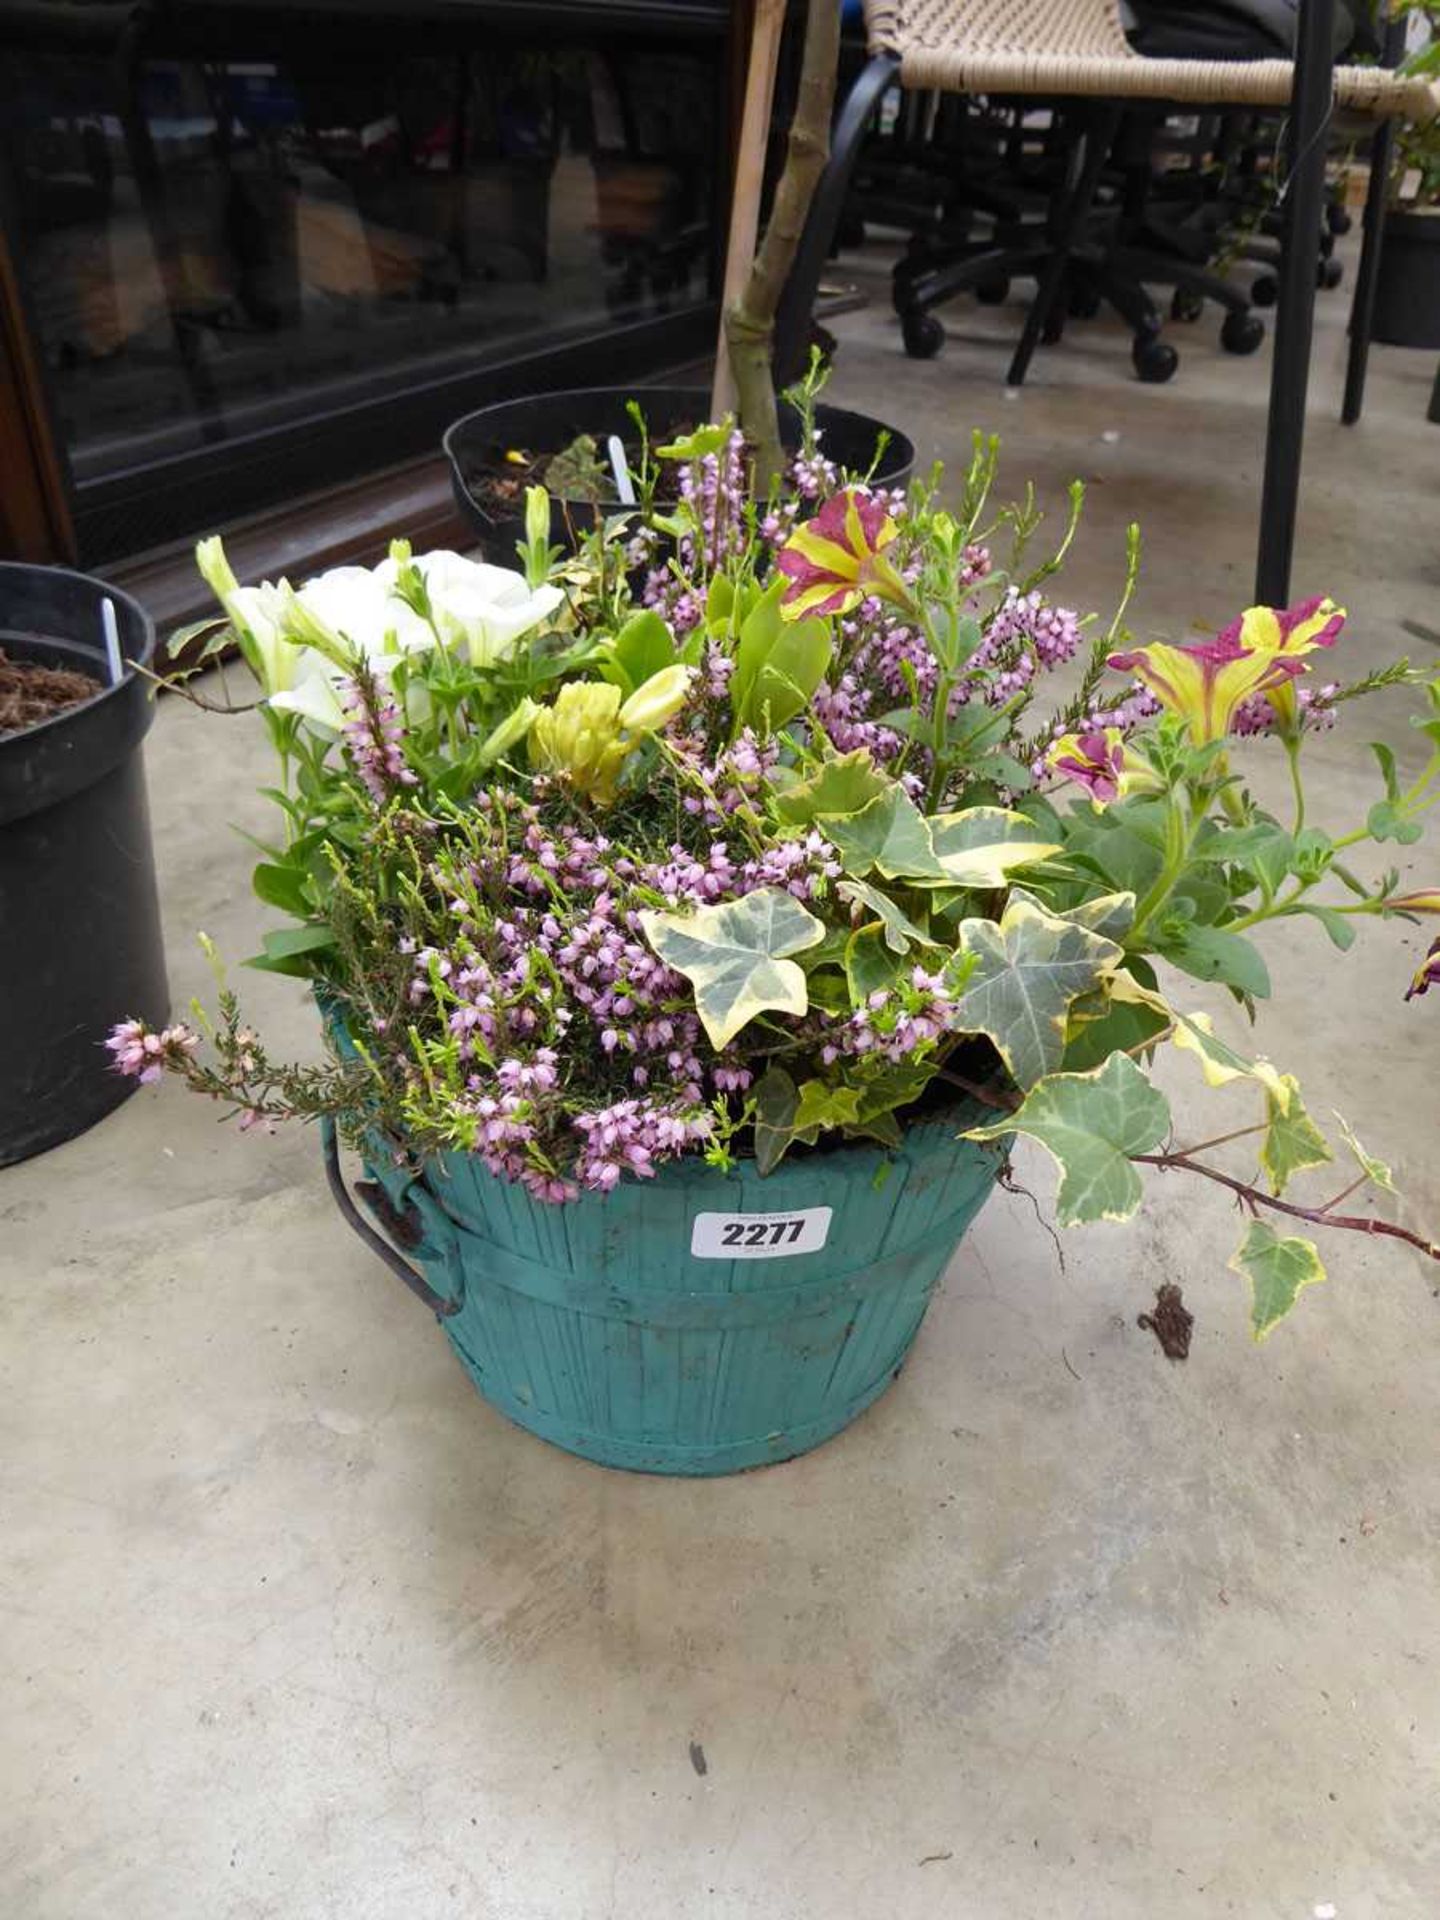 Green painted wooden barrel style planter containing mixed plants